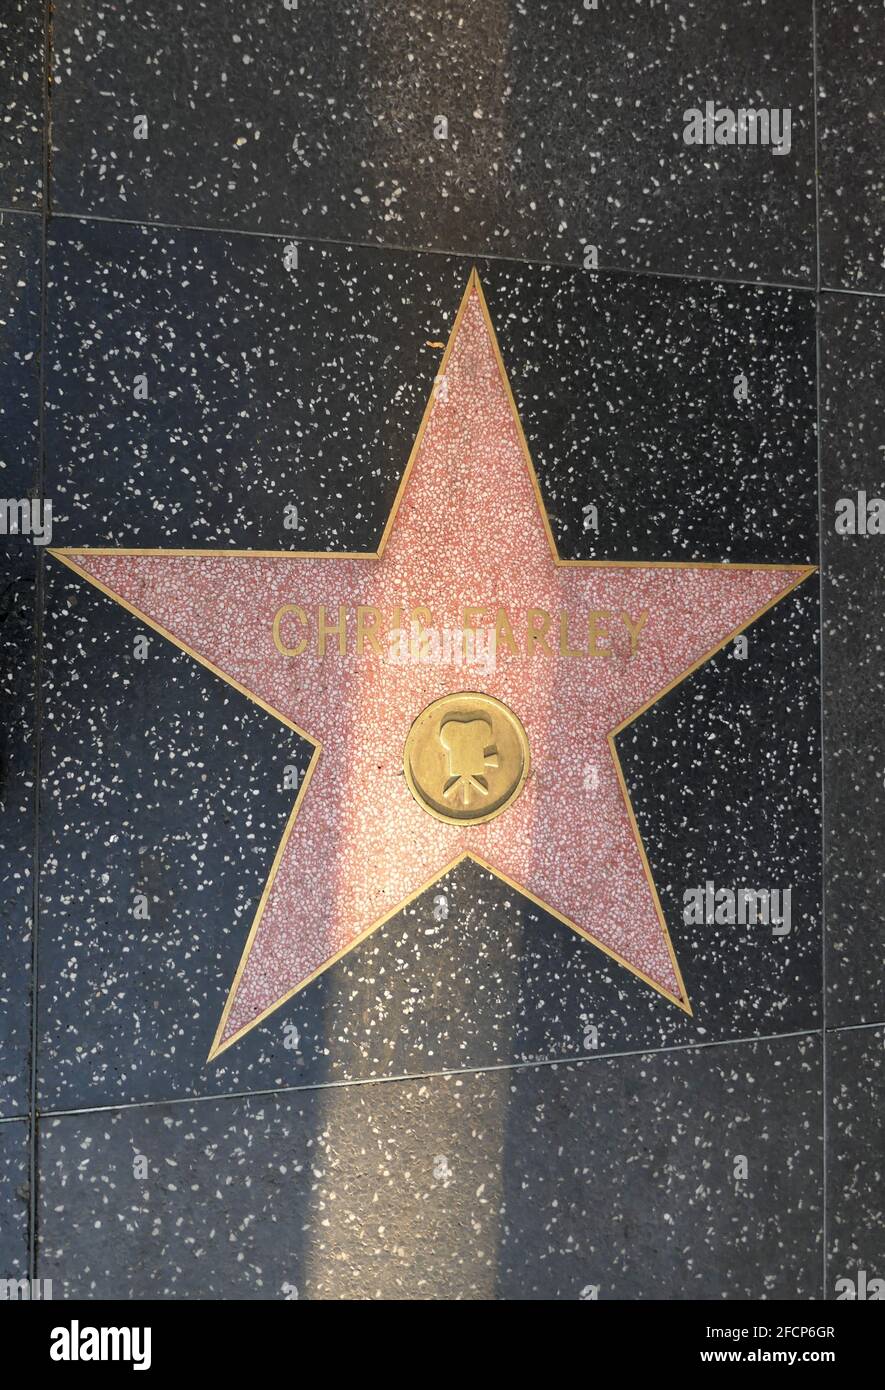 Hollywood, California, USA 17th April 2021 A general view of atmosphere of comedian Chris Farley's Star on the Hollywood Walk of Fame on April 17, 2021 in Hollywood, California, USA. Photo by Barry King/Alamy Stock Photo Stock Photo